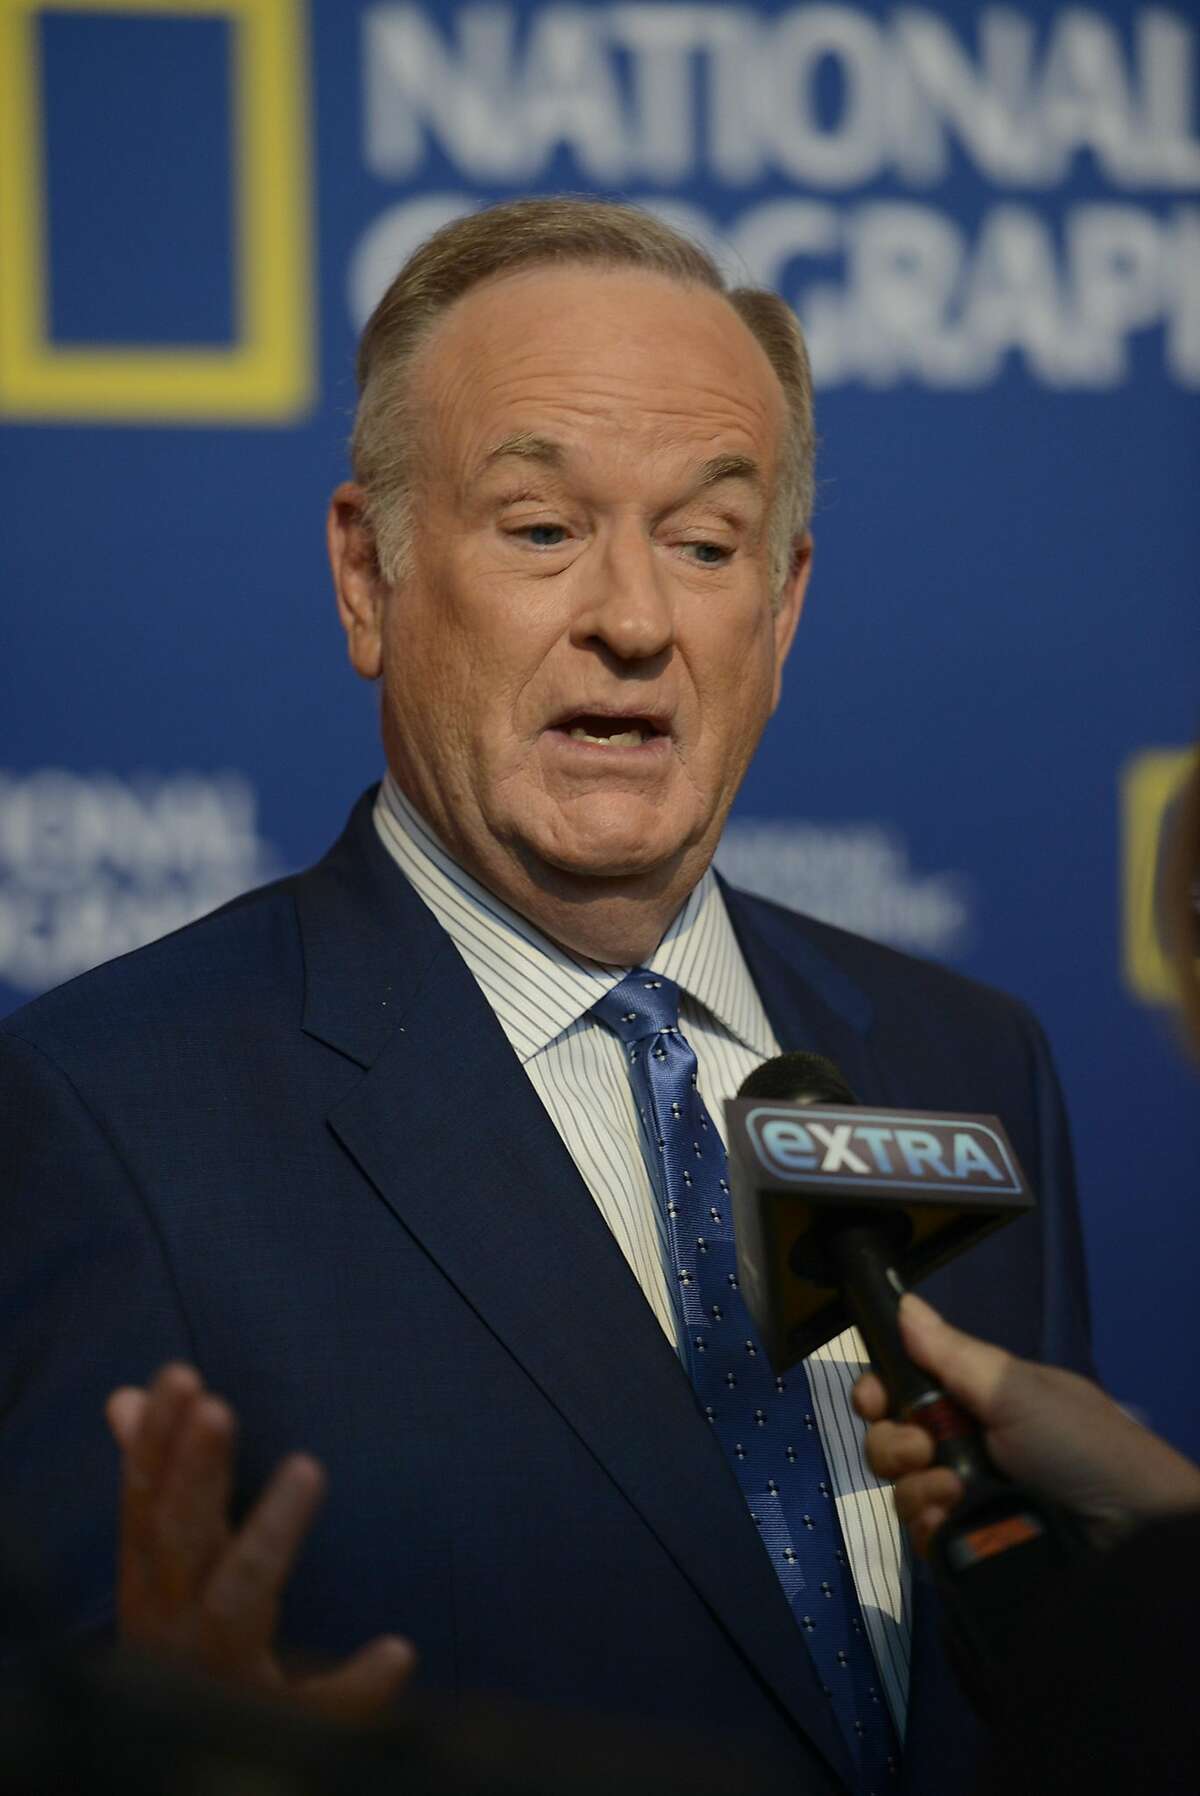 Bill O'Reilly attends the world premiere screening of National Geographic Channel's "Killing Reagan" at the Newseum on Thursday, Oct. 6, 2016 in Washington D.C. (Leigh Vogel/National Geographic Channel/PictureGroup/Sipa USA/TNS)